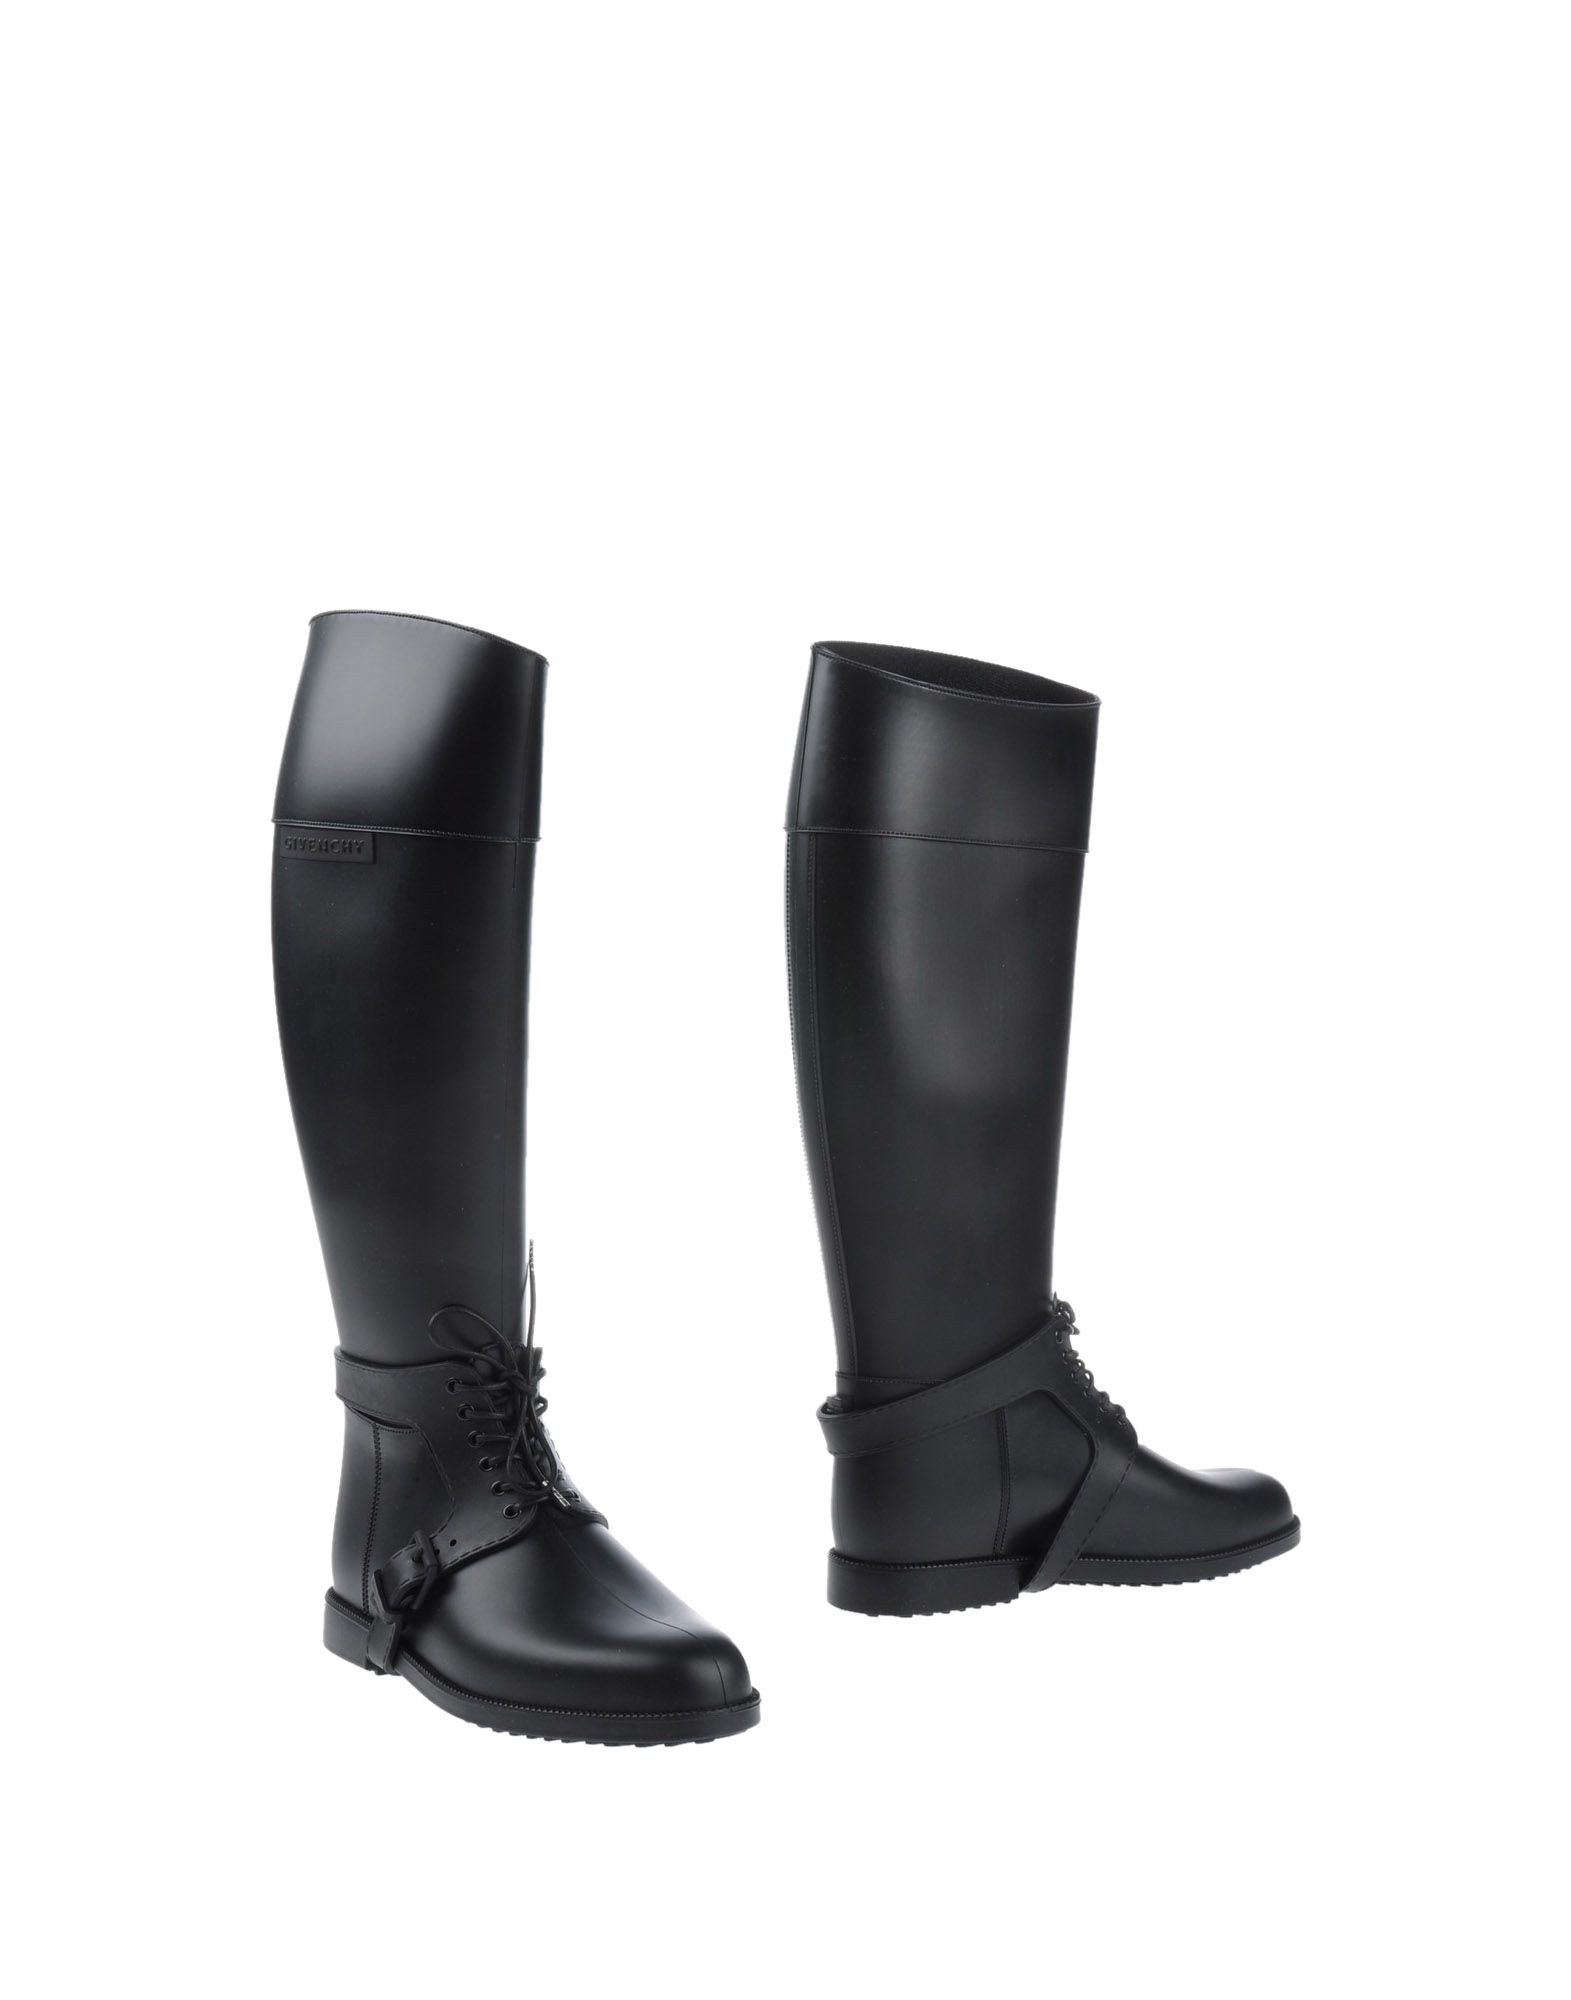 GIVENCHY BOOTS,44694213VN 15